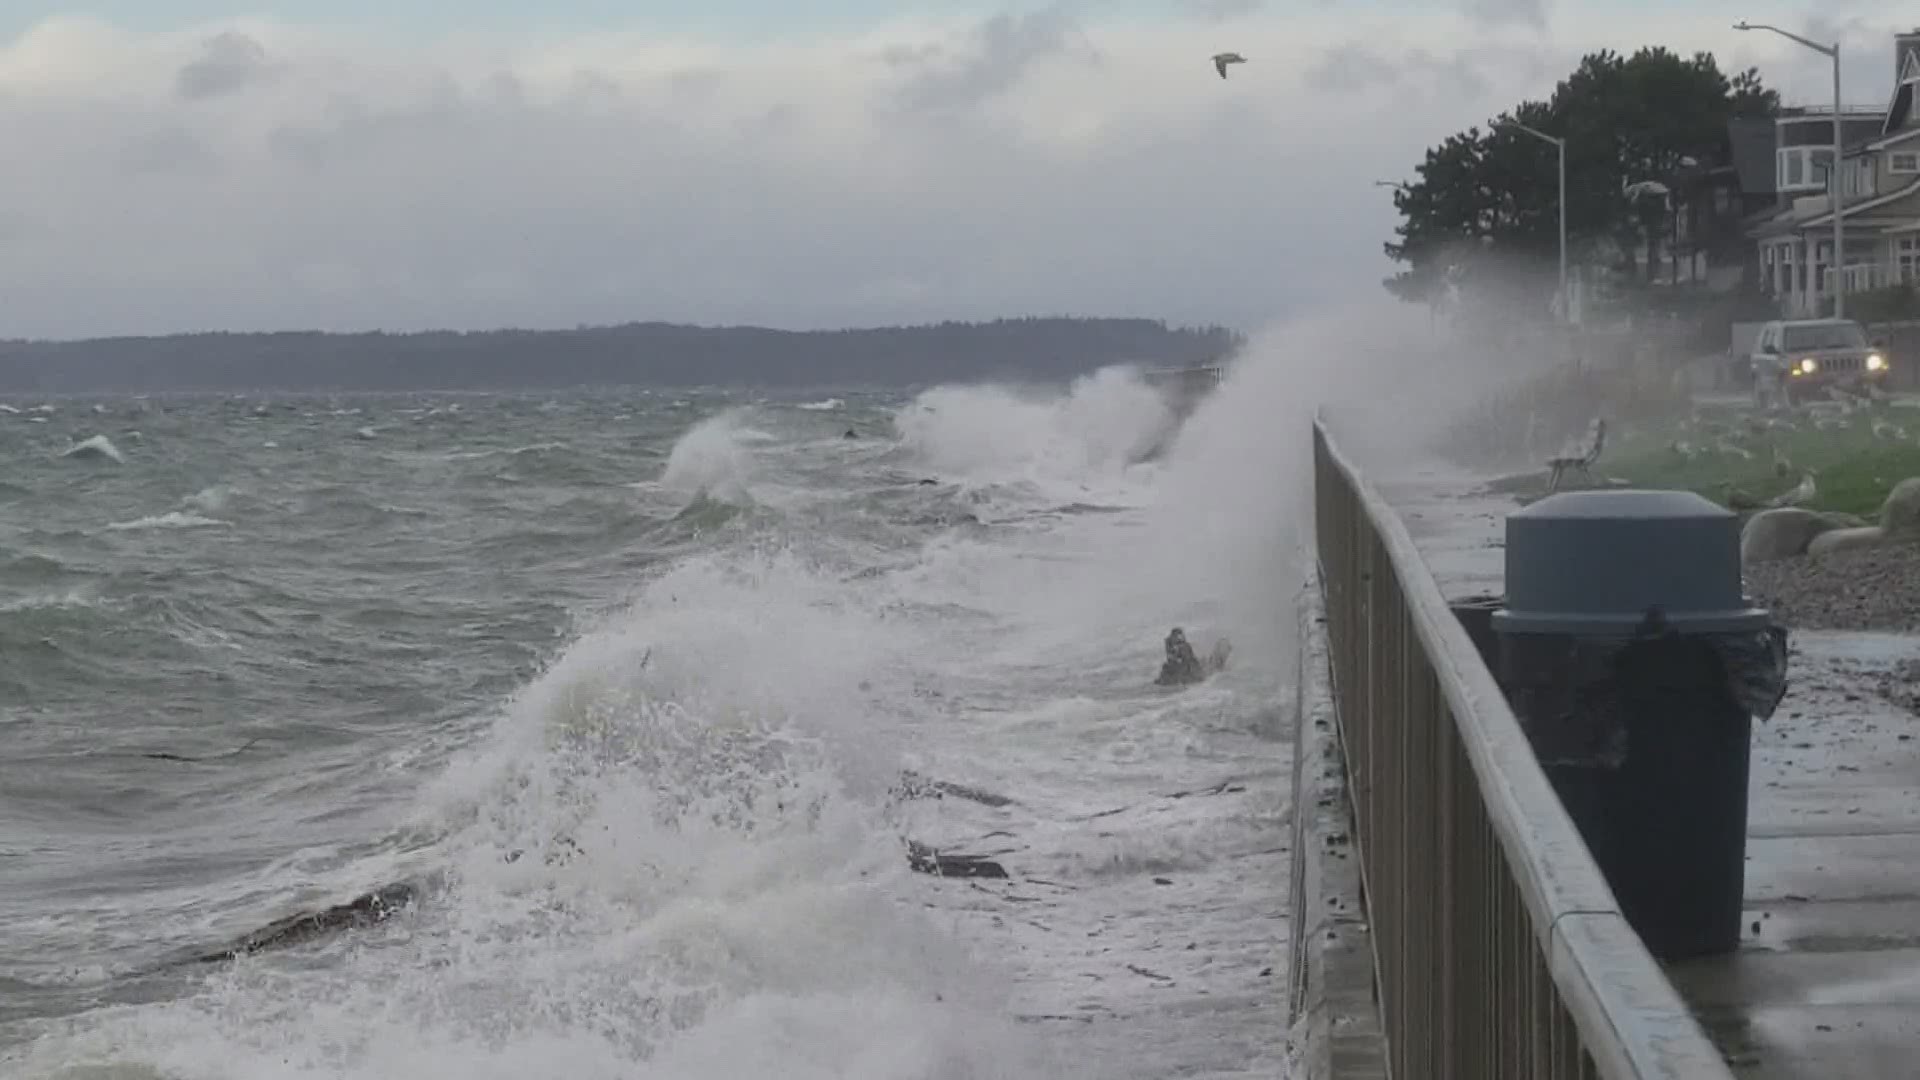 Strong winds kicked up waves at Seattle’s Alki Beach Thursday.